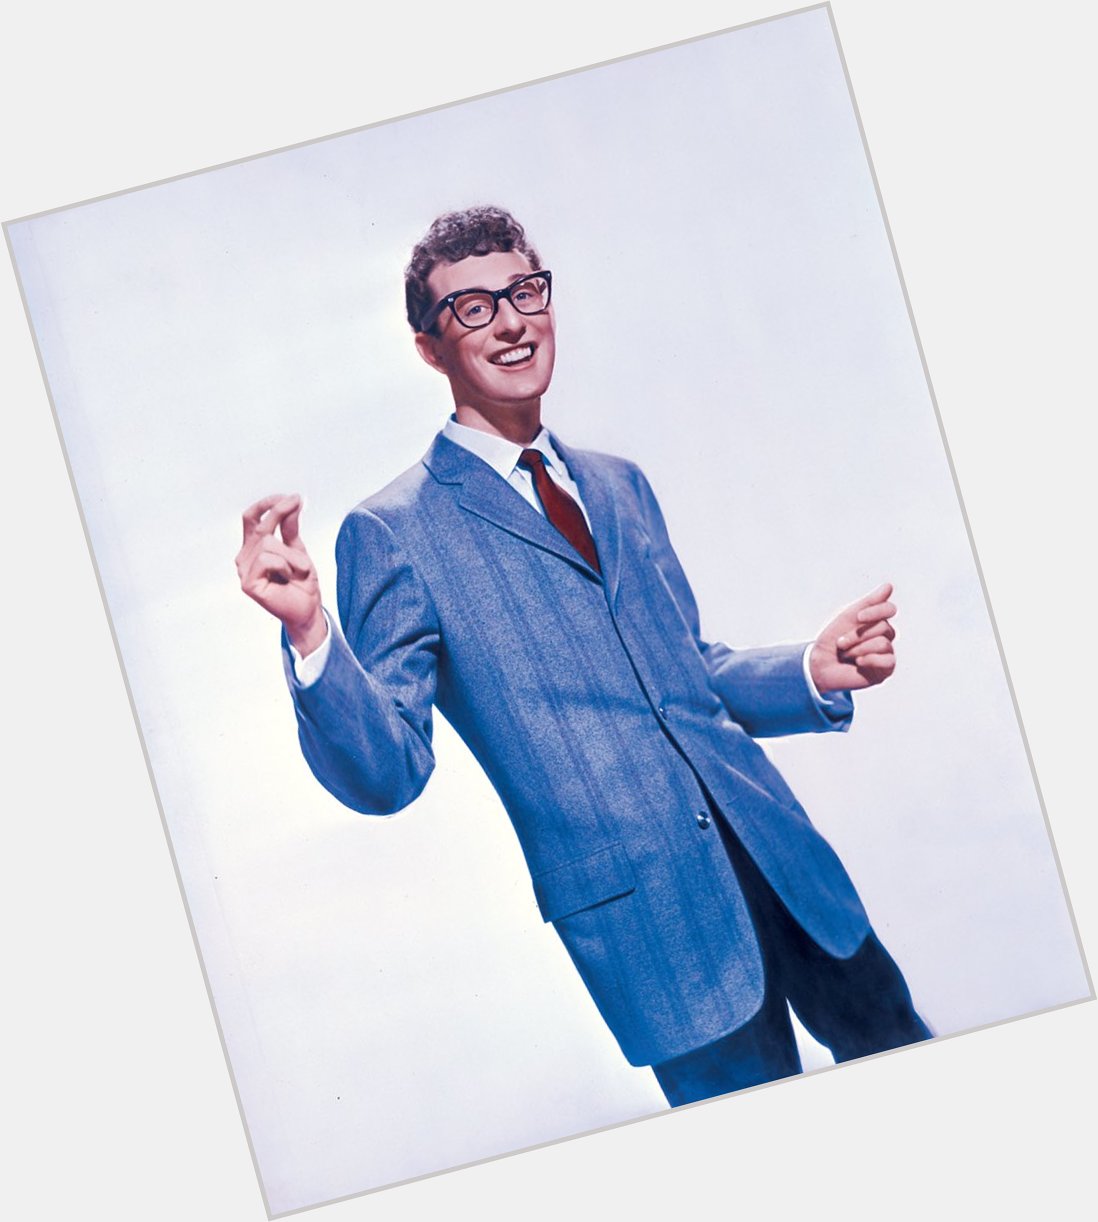 Happy birthday to someone who left us way too early, the great Buddy Holly. He\d have been 82 today. 